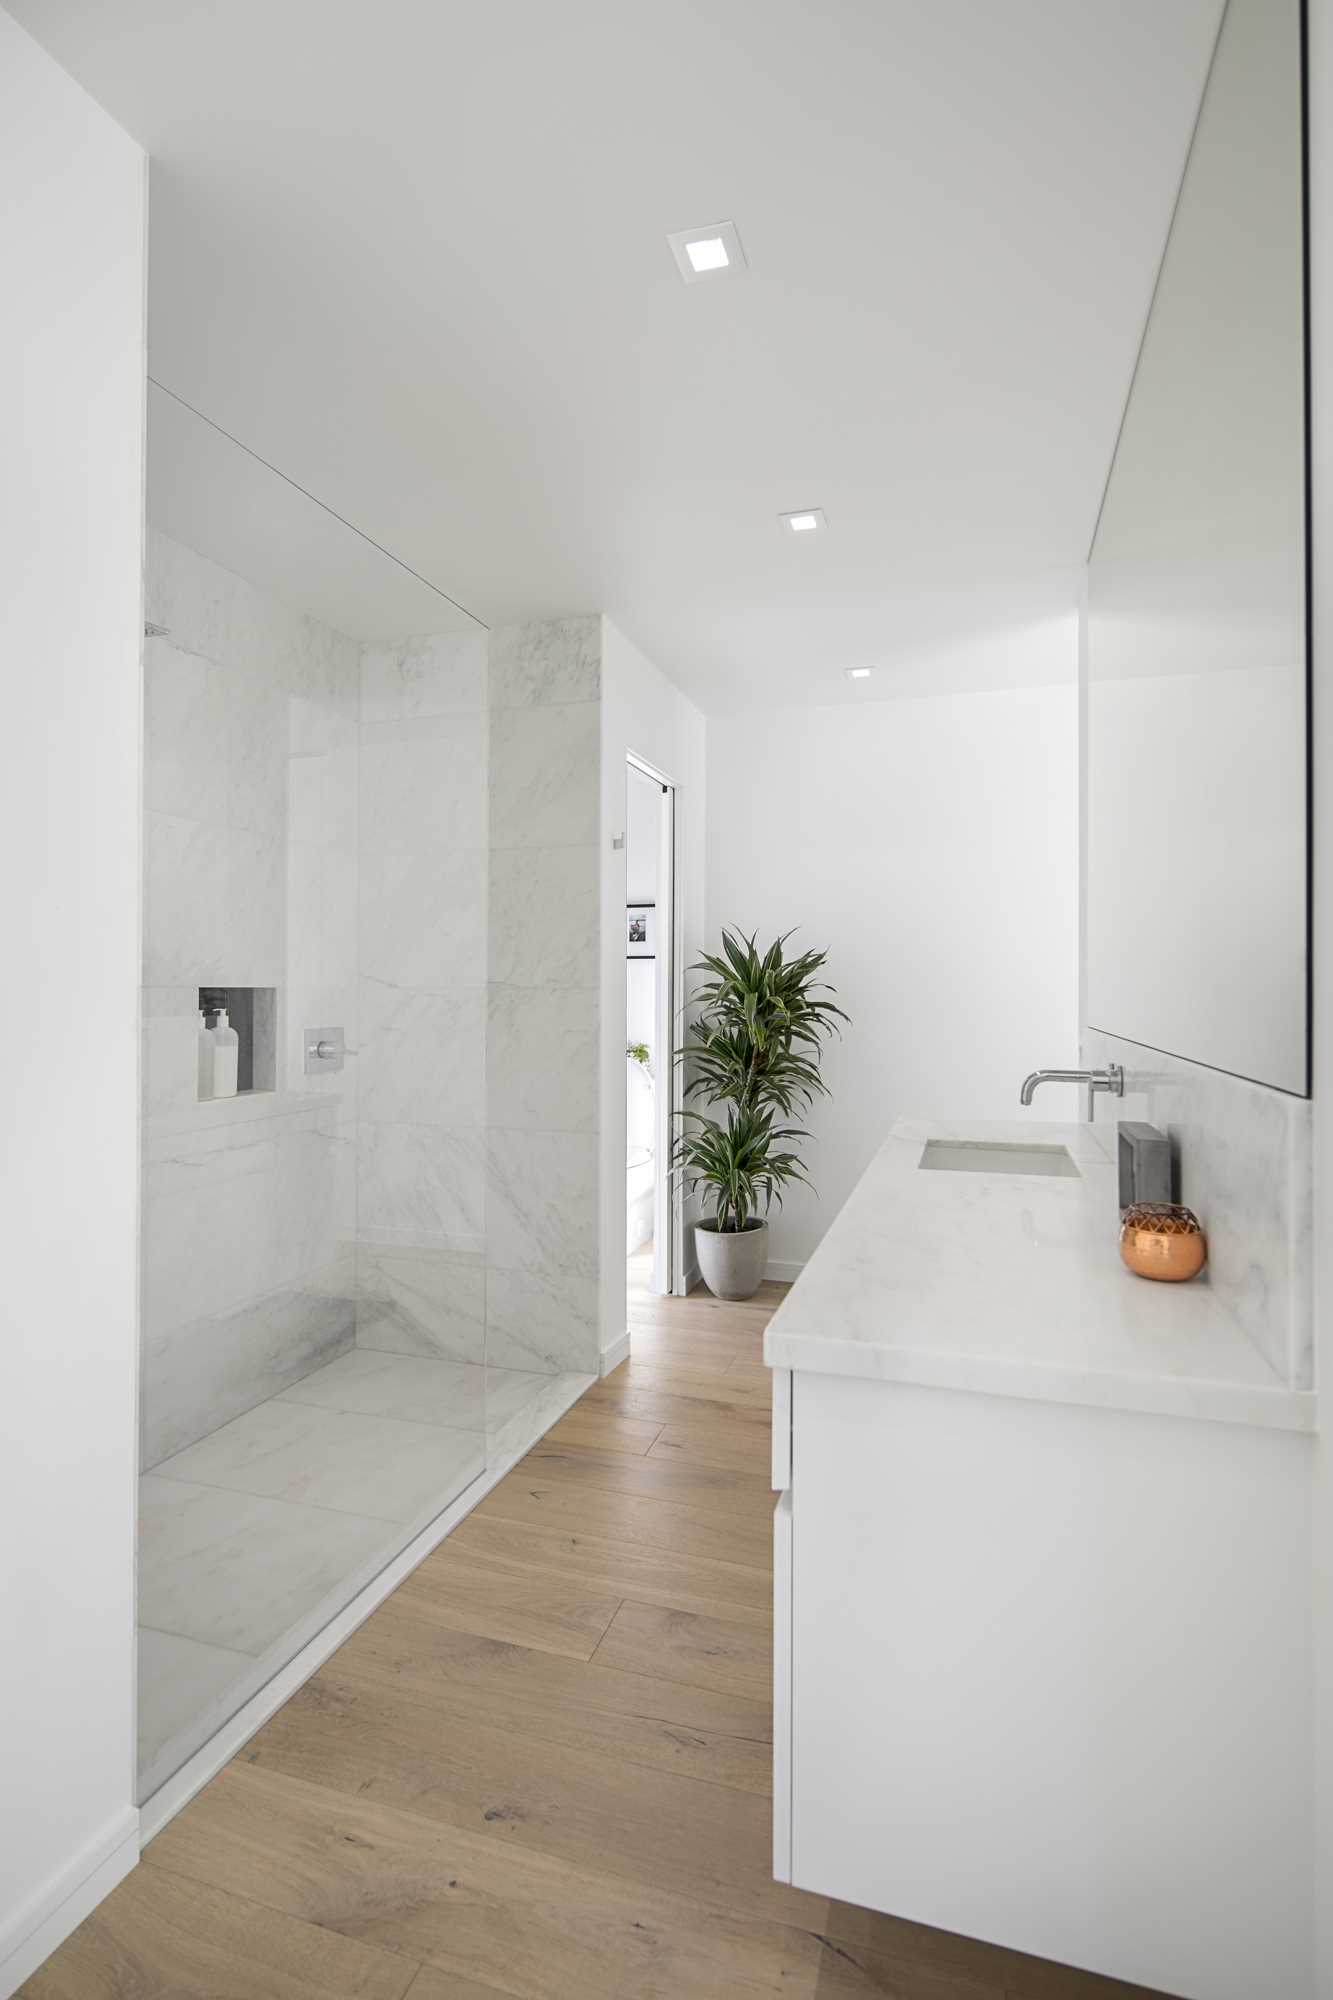 In this modern bathroom, there's a large glass-enclosed walk-in shower positioned opposite the white vanity.